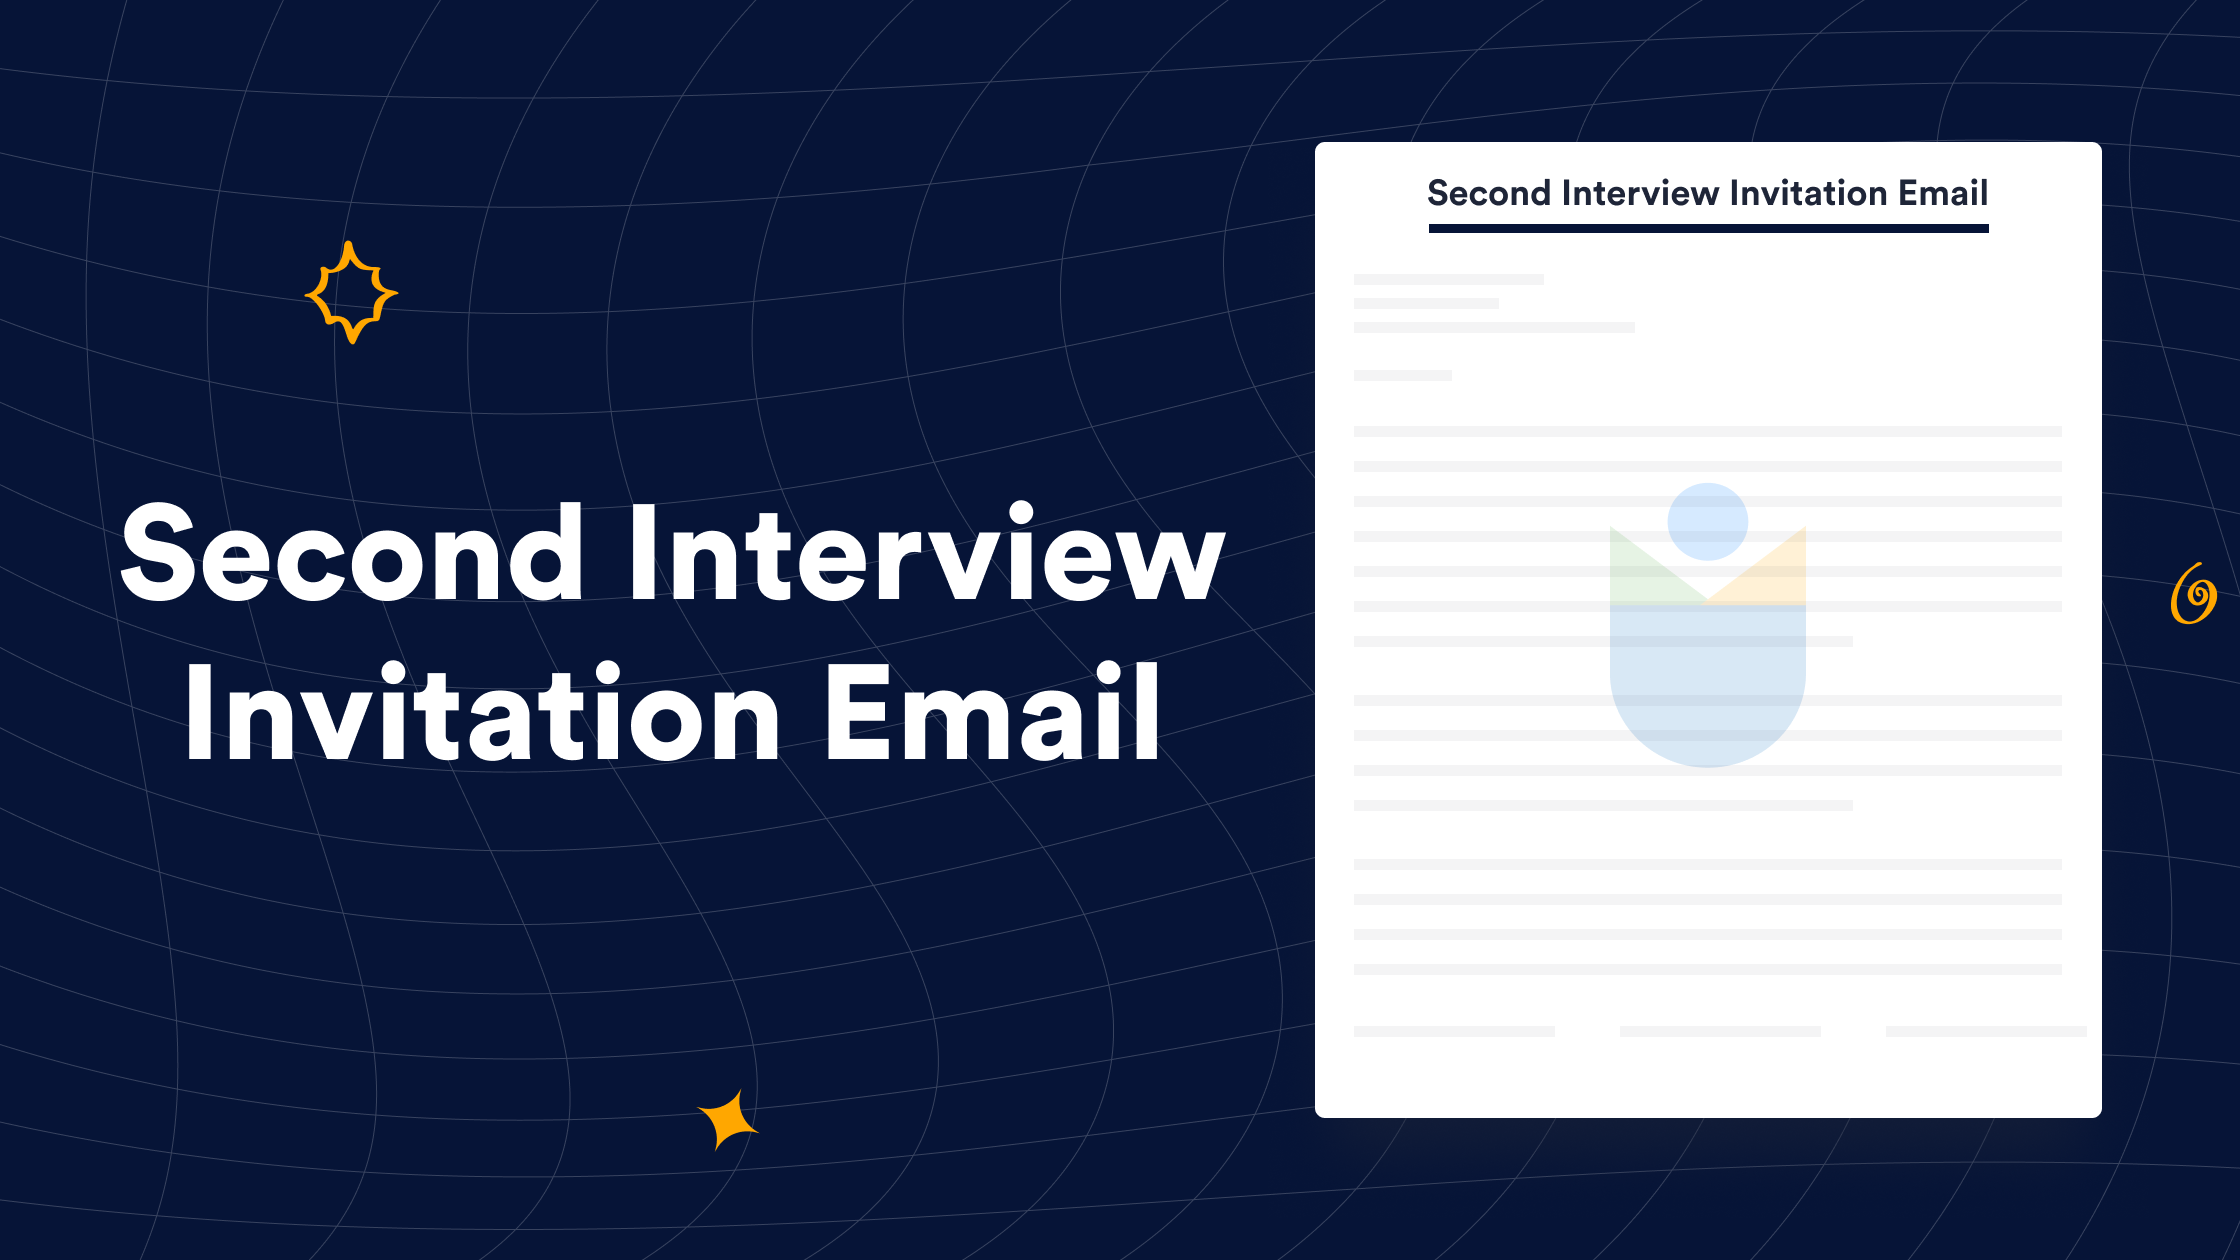 Second Interview Invitation Email